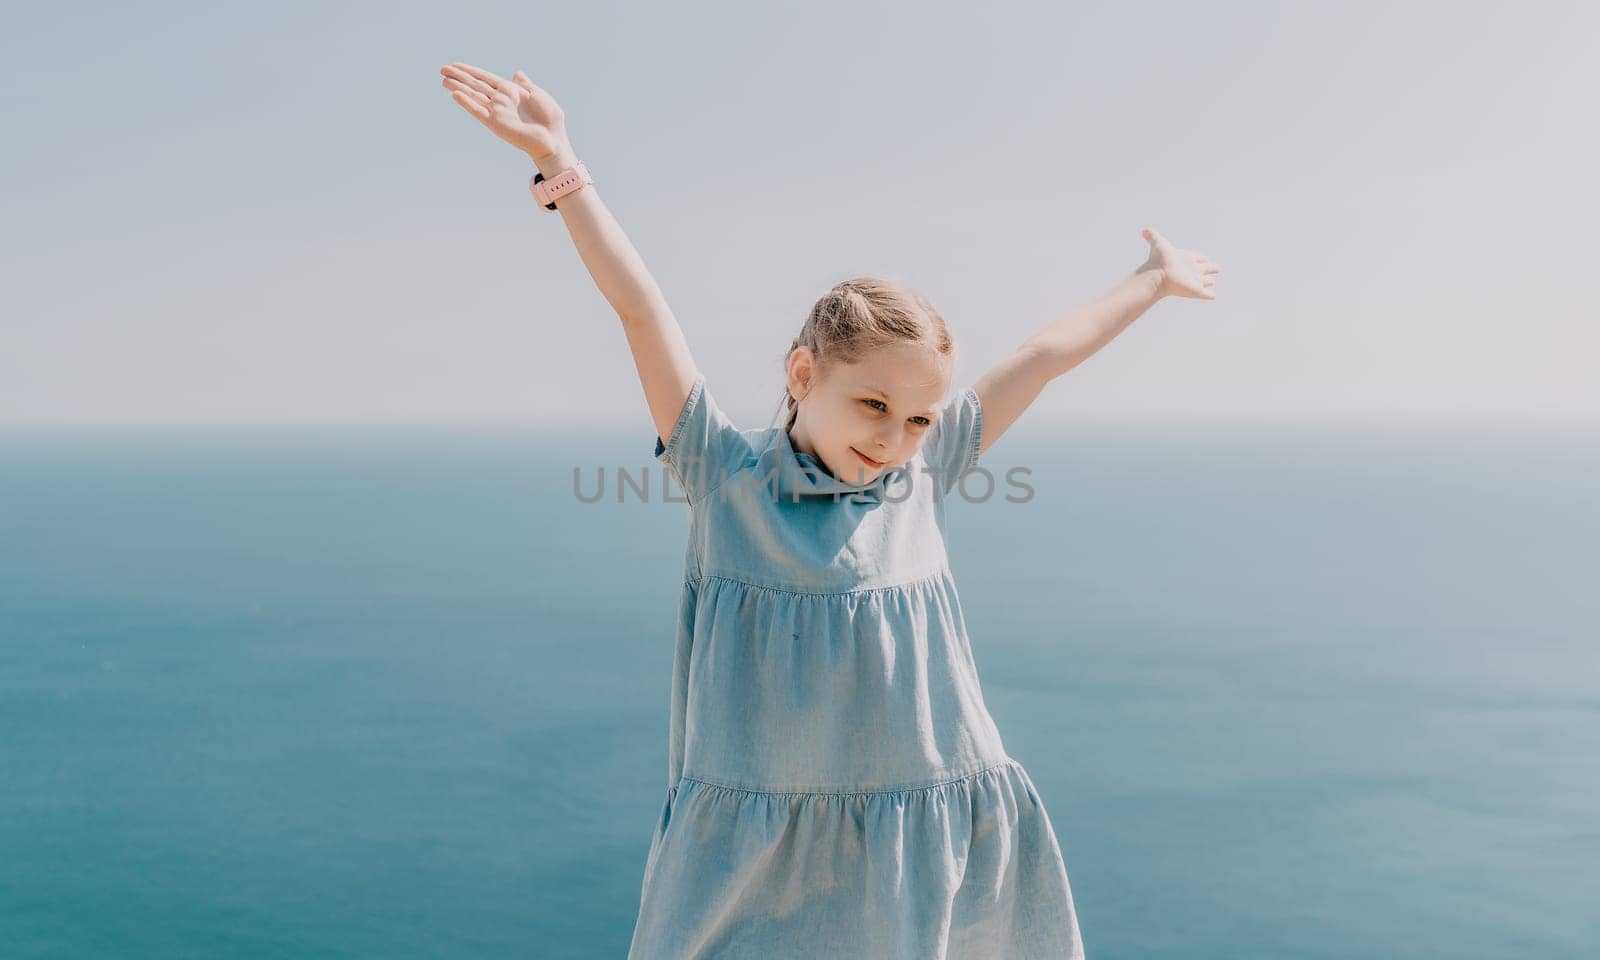 A young girl is standing on a beach, wearing a blue dress and holding her arms up in the air. Concept of joy and freedom, as the girl appears to be enjoying her time by the ocean. by panophotograph